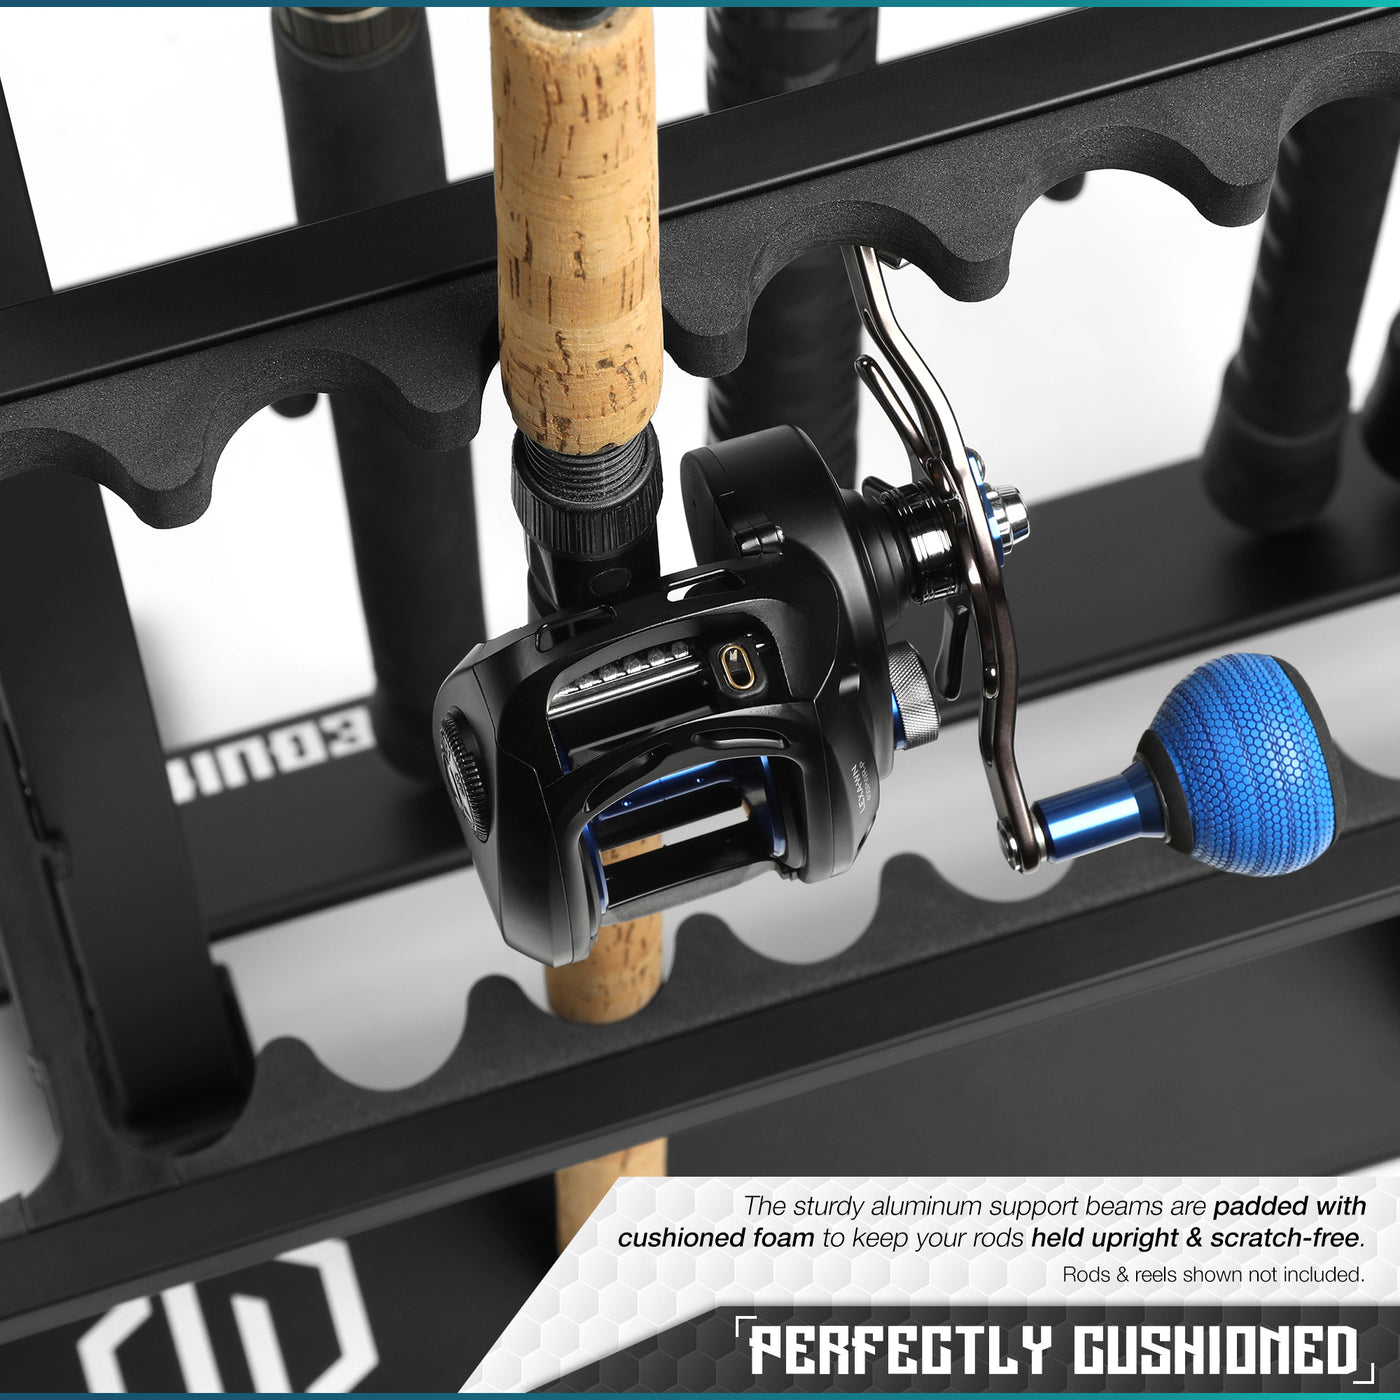 Perfectly Cushioned - The sturdy aluminum support beams are padded with cushioned foam to keep your rods help upright & scratch-free. Rods & reels shown not included.